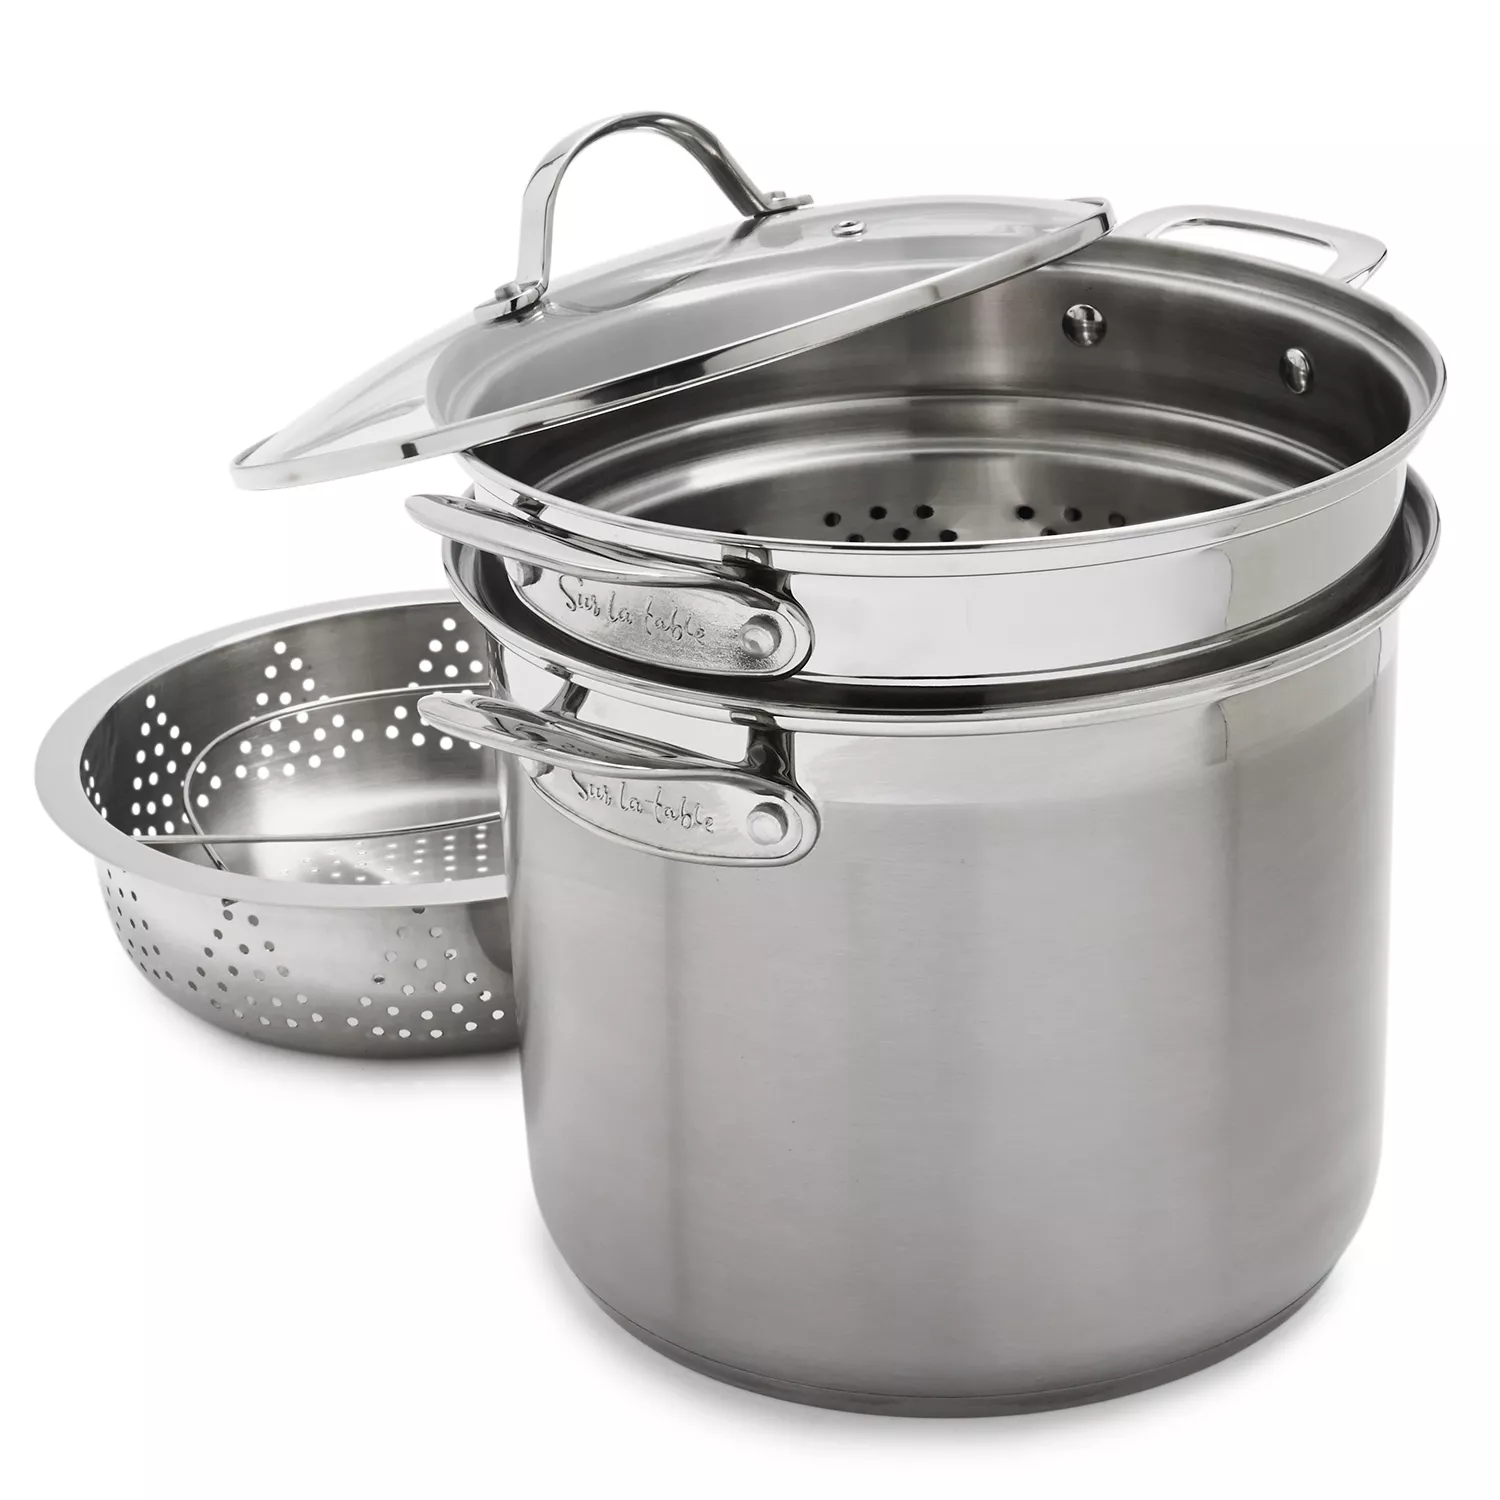 Sur La Table Classic 5-Ply Stainless Steel Stockpot, 8 qt., Silver